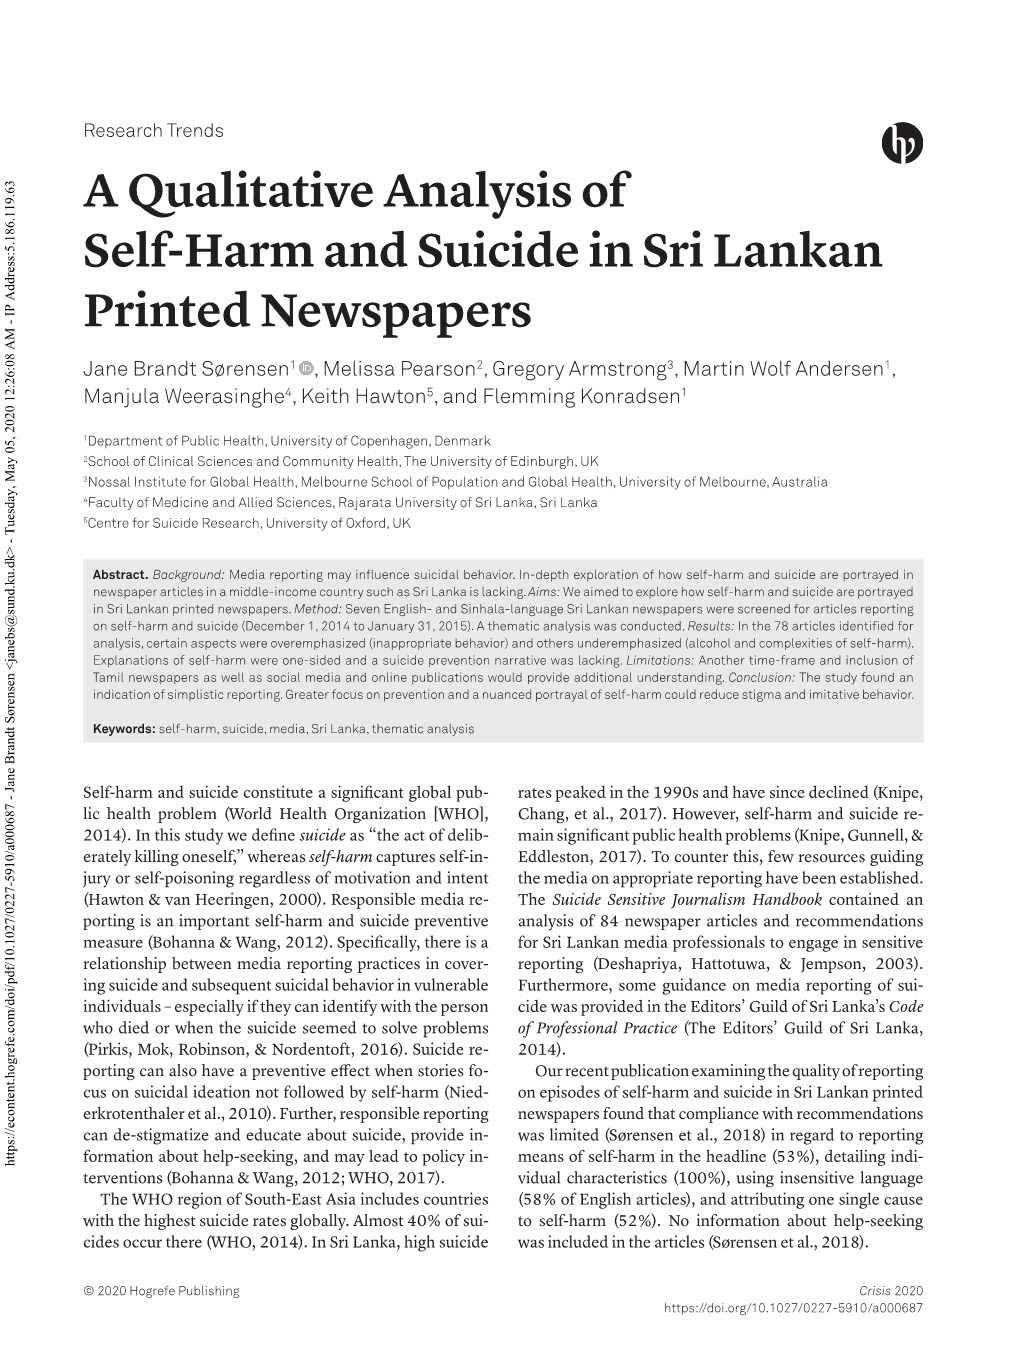 A Qualitative Analysis of Self-Harm and Suicide in Sri Lankan Printed Newspapers